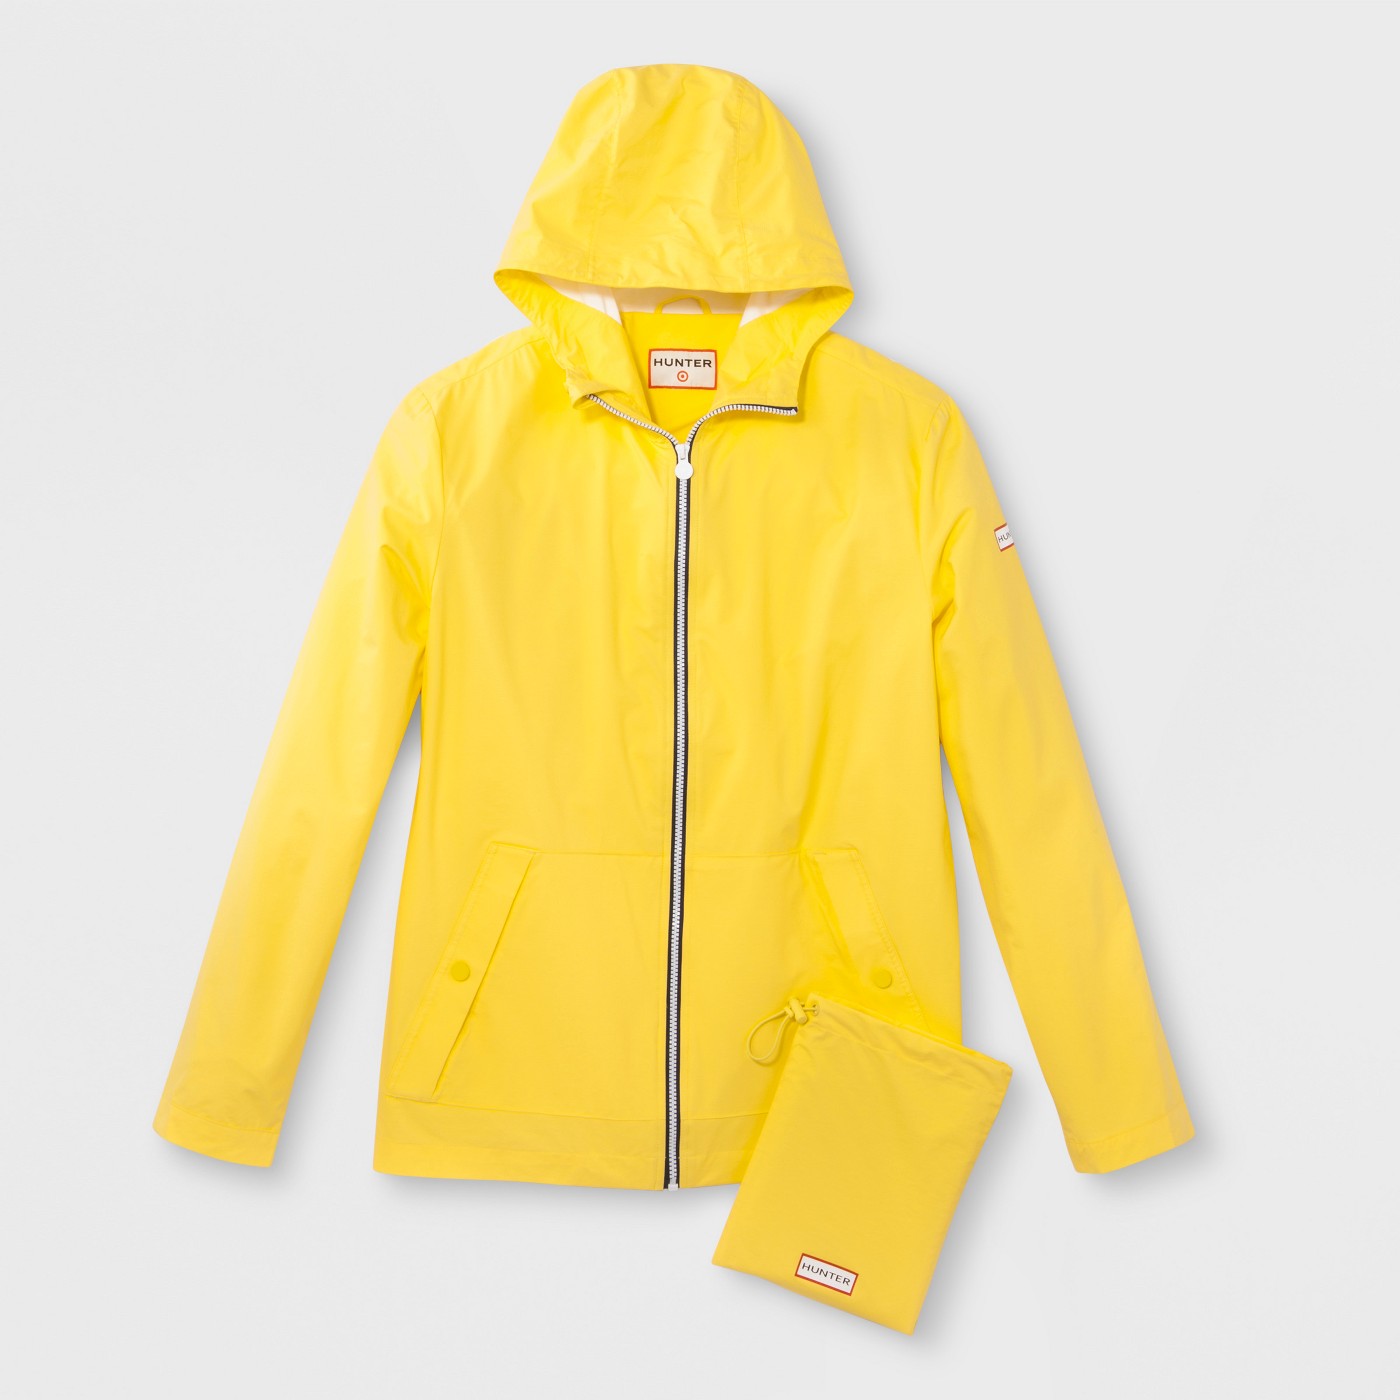 Hunter for Target Adult Unisex Packable Rain Coat - Yellow - image 4 of 8